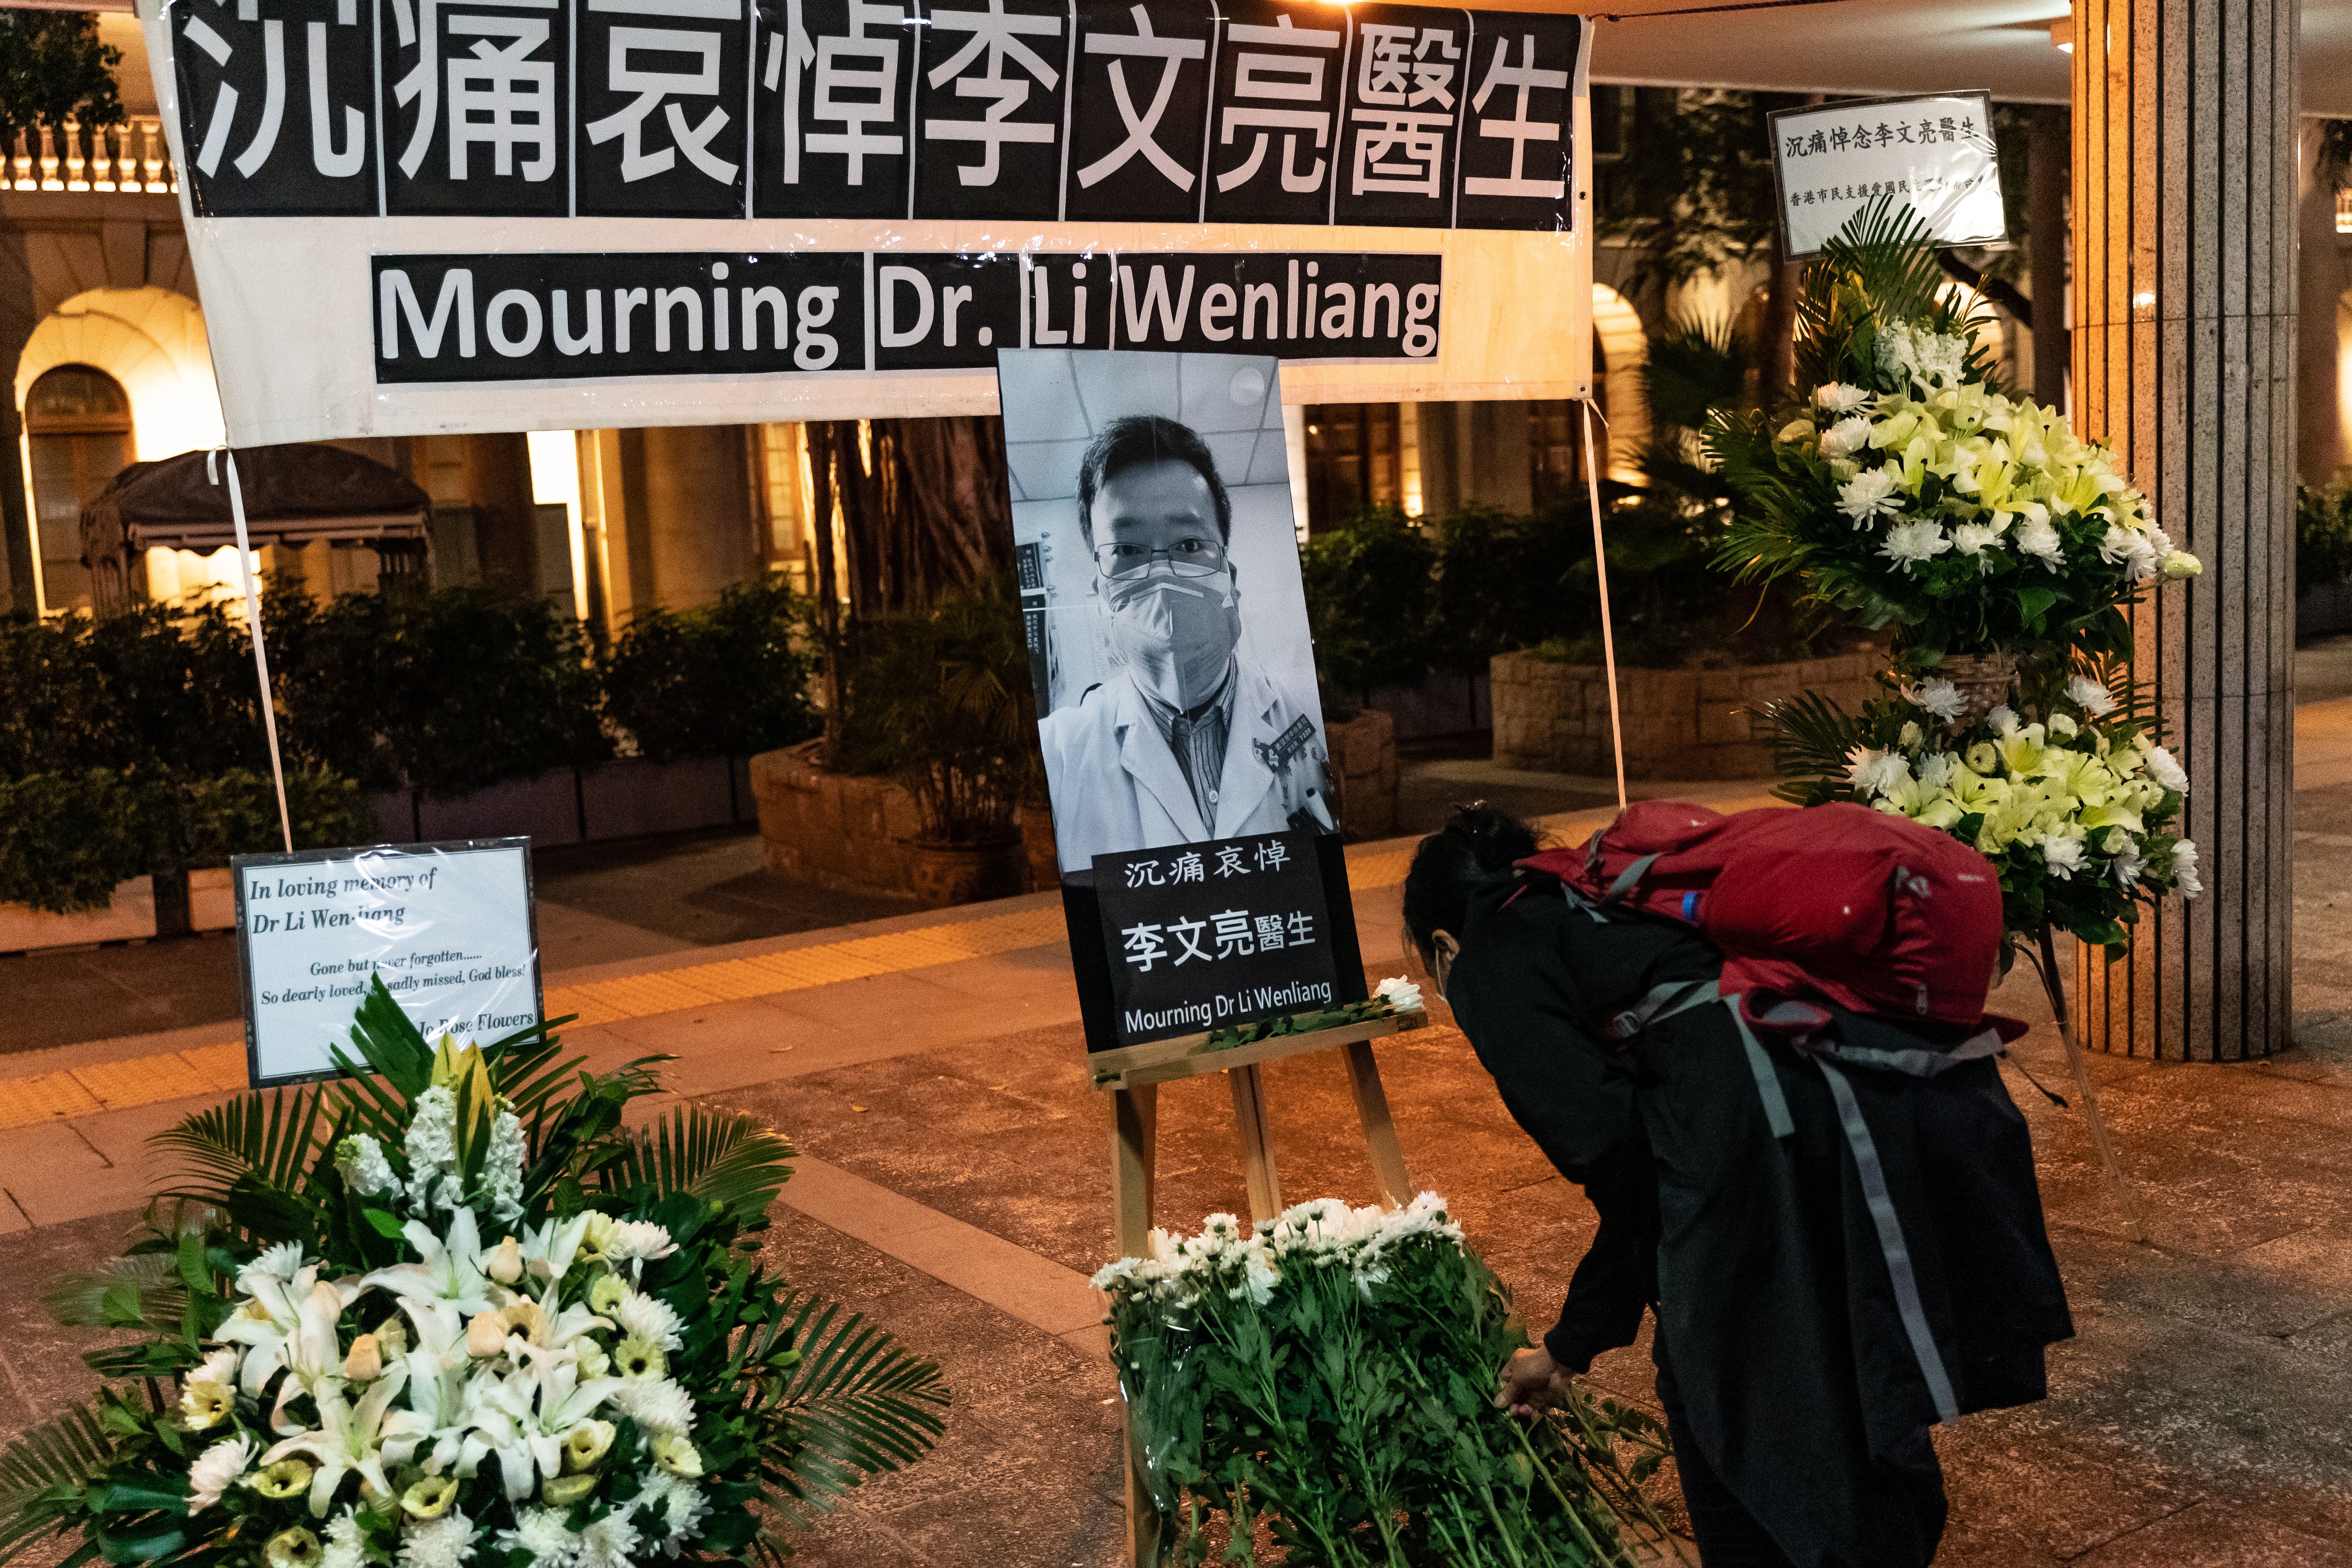 In this image, a sign reads "Mourning Dr. Li Wenliang" and a photo of him stands among flowers